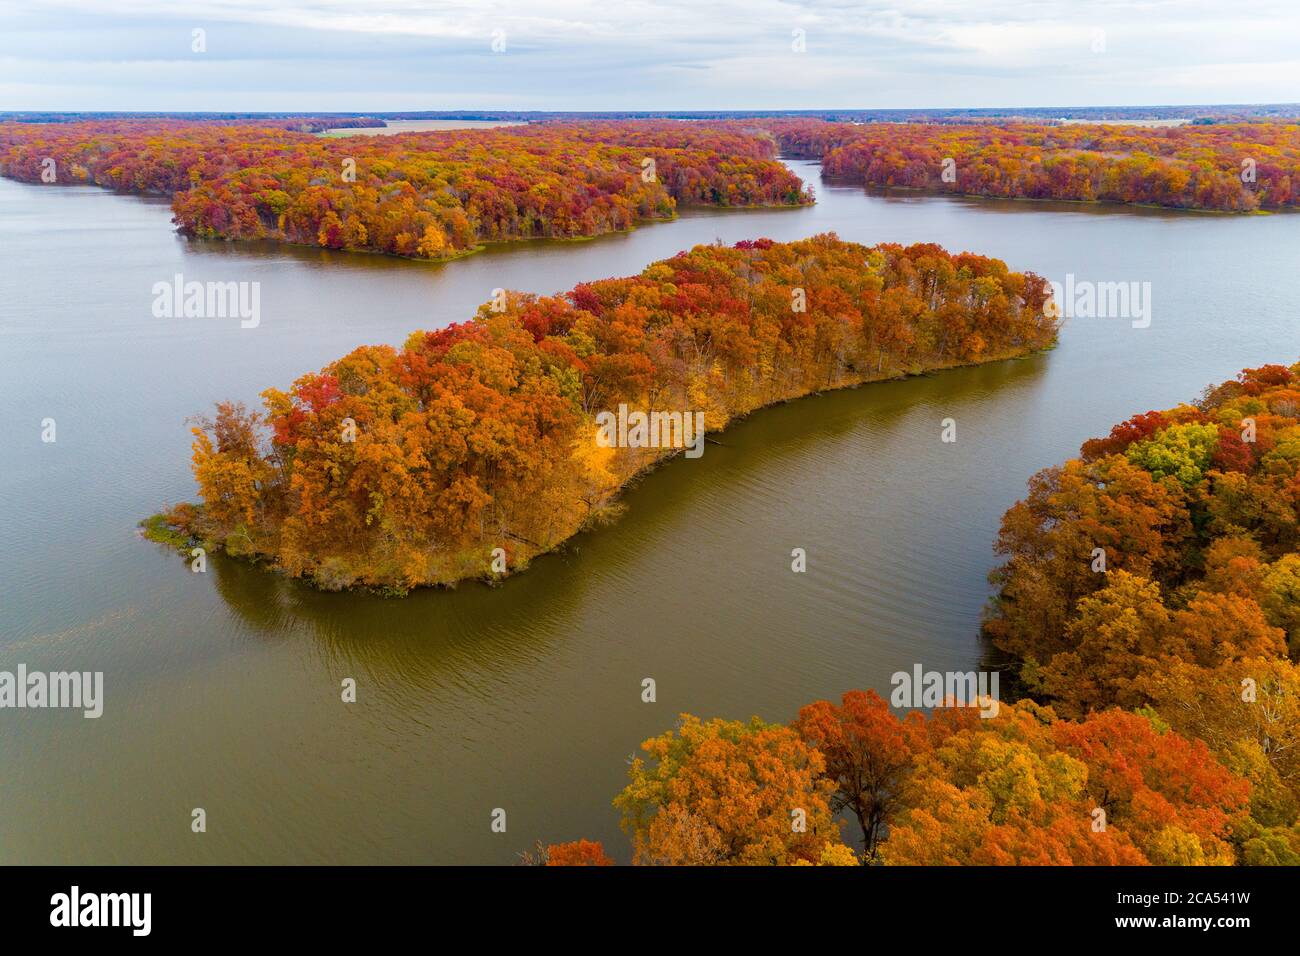 Aerial view of islands on lake, Stephen A. Forbes State Park, Marion Co., Illinois, USA Stock Photo